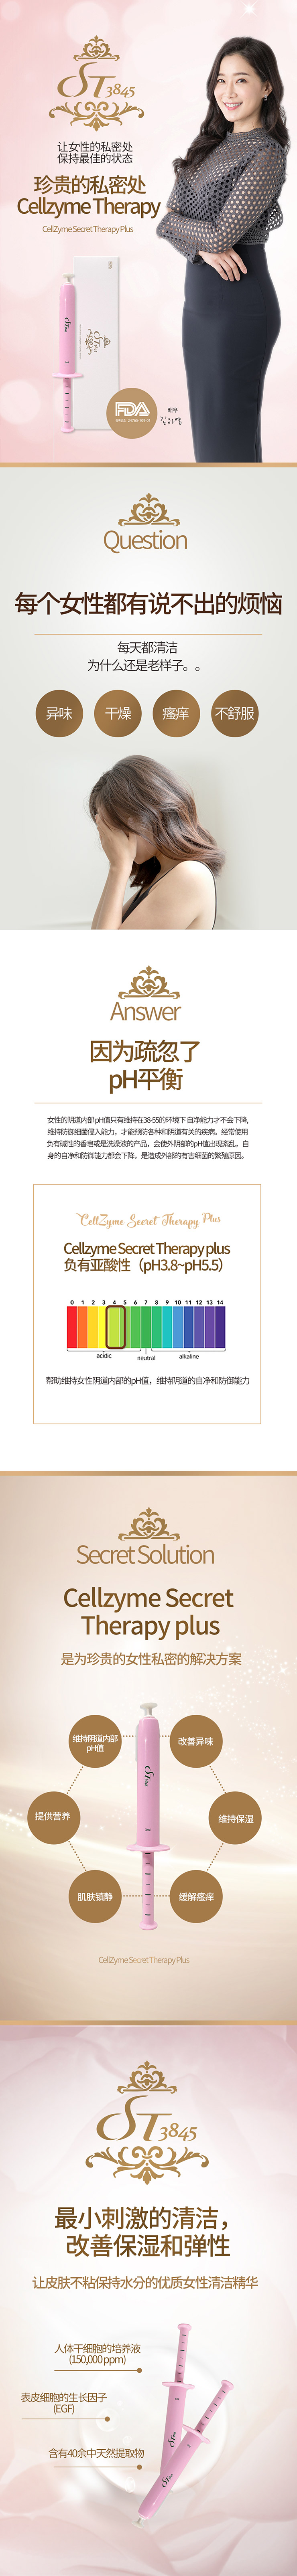 cellzyme therapy